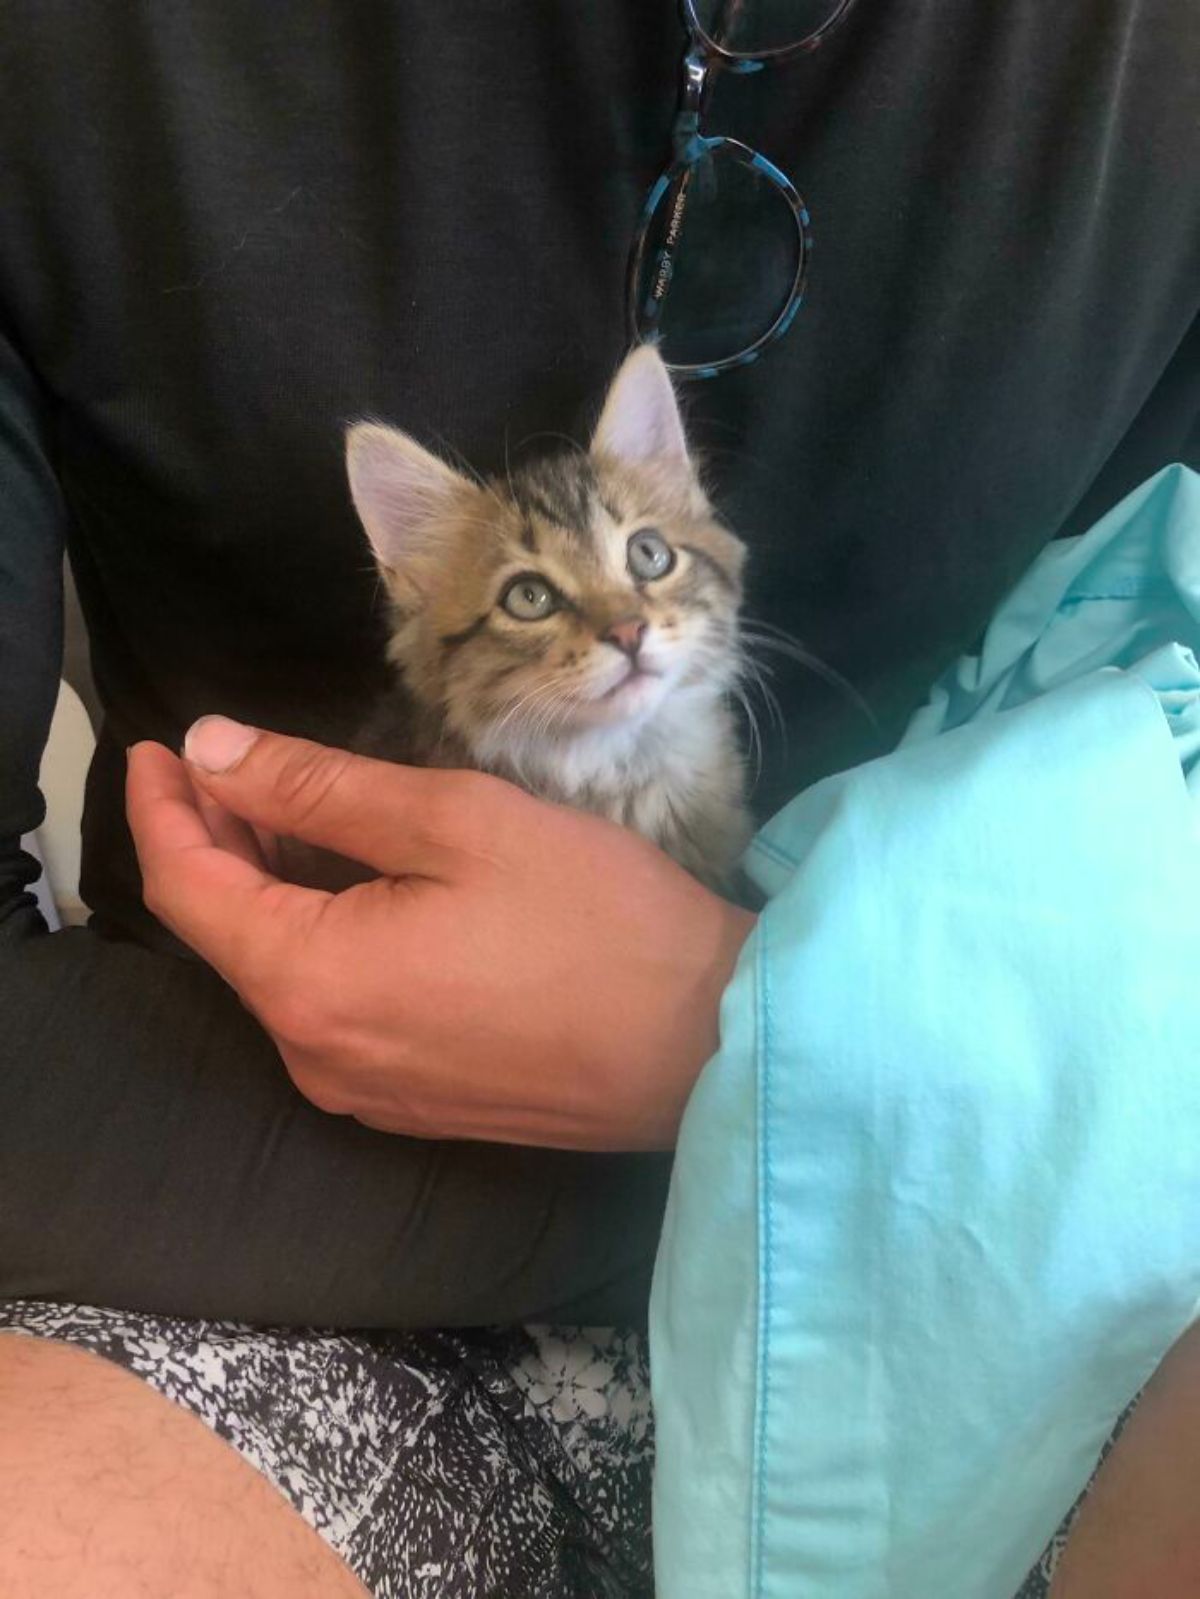 brown and white tabby kitten being held by someone